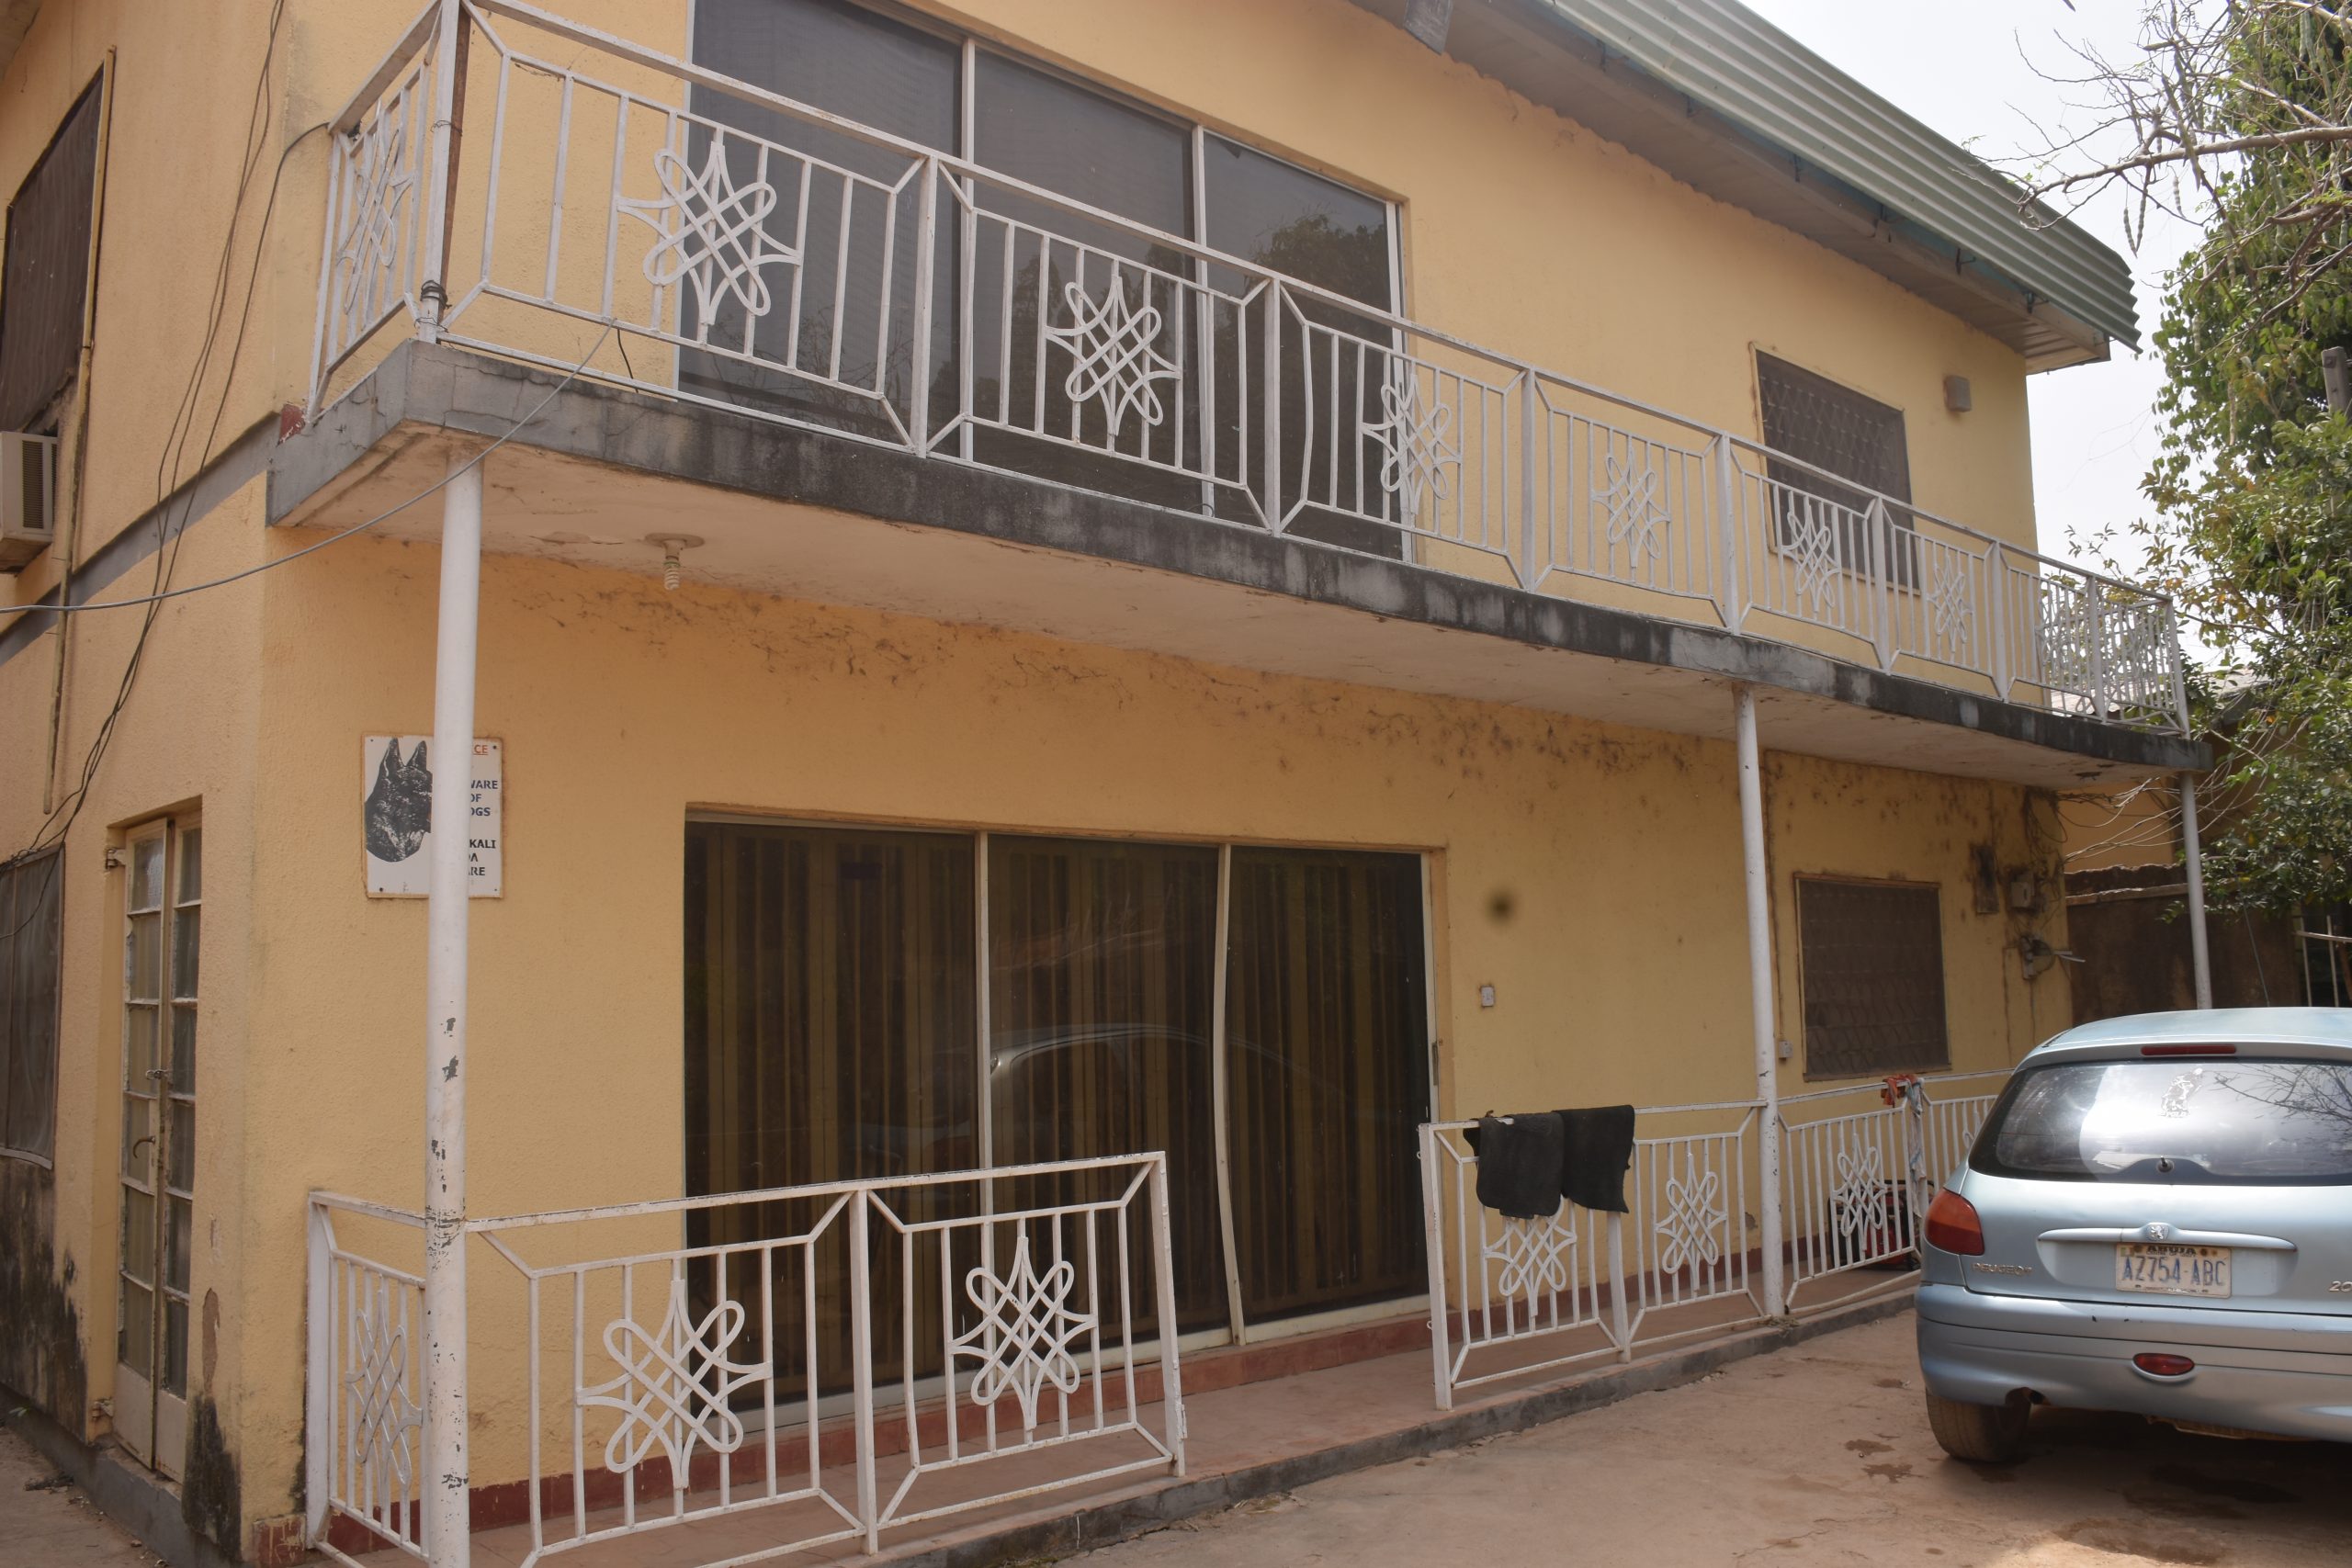 2 Nos 4 Bedroom Flat With 3 Room  on Storey Building @ Kuse Road, Shooting Range